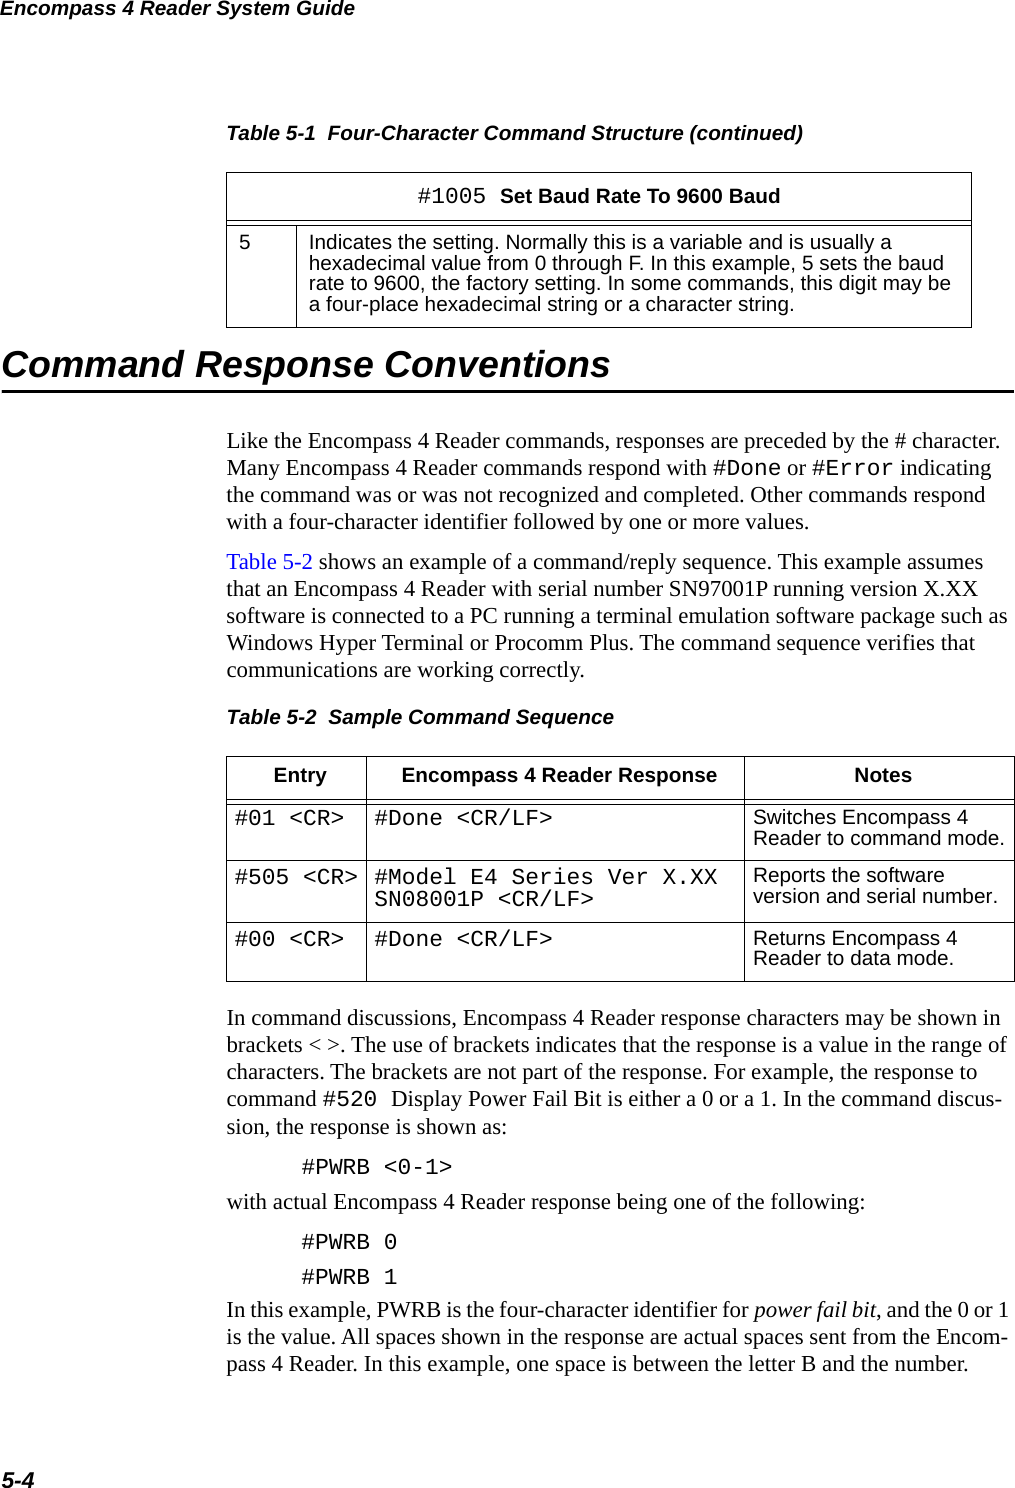 Encompass 4 Reader System Guide5-4Command Response ConventionsLike the Encompass 4 Reader commands, responses are preceded by the # character. Many Encompass 4 Reader commands respond with #Done or #Error indicating the command was or was not recognized and completed. Other commands respond with a four-character identifier followed by one or more values.Table 5-2 shows an example of a command/reply sequence. This example assumes that an Encompass 4 Reader with serial number SN97001P running version X.XX software is connected to a PC running a terminal emulation software package such as Windows Hyper Terminal or Procomm Plus. The command sequence verifies that communications are working correctly.Table 5-2  Sample Command SequenceEntry Encompass 4 Reader Response Notes#01 &lt;CR&gt; #Done &lt;CR/LF&gt; Switches Encompass 4 Reader to command mode.#505 &lt;CR&gt; #Model E4 Series Ver X.XX SN08001P &lt;CR/LF&gt; Reports the software version and serial number.#00 &lt;CR&gt; #Done &lt;CR/LF&gt; Returns Encompass 4 Reader to data mode.In command discussions, Encompass 4 Reader response characters may be shown in brackets &lt; &gt;. The use of brackets indicates that the response is a value in the range of characters. The brackets are not part of the response. For example, the response to command #520 Display Power Fail Bit is either a 0 or a 1. In the command discus-sion, the response is shown as:#PWRB &lt;0-1&gt;with actual Encompass 4 Reader response being one of the following:#PWRB 0#PWRB 1In this example, PWRB is the four-character identifier for power fail bit, and the 0 or 1 is the value. All spaces shown in the response are actual spaces sent from the Encom-pass 4 Reader. In this example, one space is between the letter B and the number. 5Indicates the setting. Normally this is a variable and is usually a hexadecimal value from 0 through F. In this example, 5 sets the baud rate to 9600, the factory setting. In some commands, this digit may be a four-place hexadecimal string or a character string.Table 5-1  Four-Character Command Structure (continued)#1005 Set Baud Rate To 9600 Baud